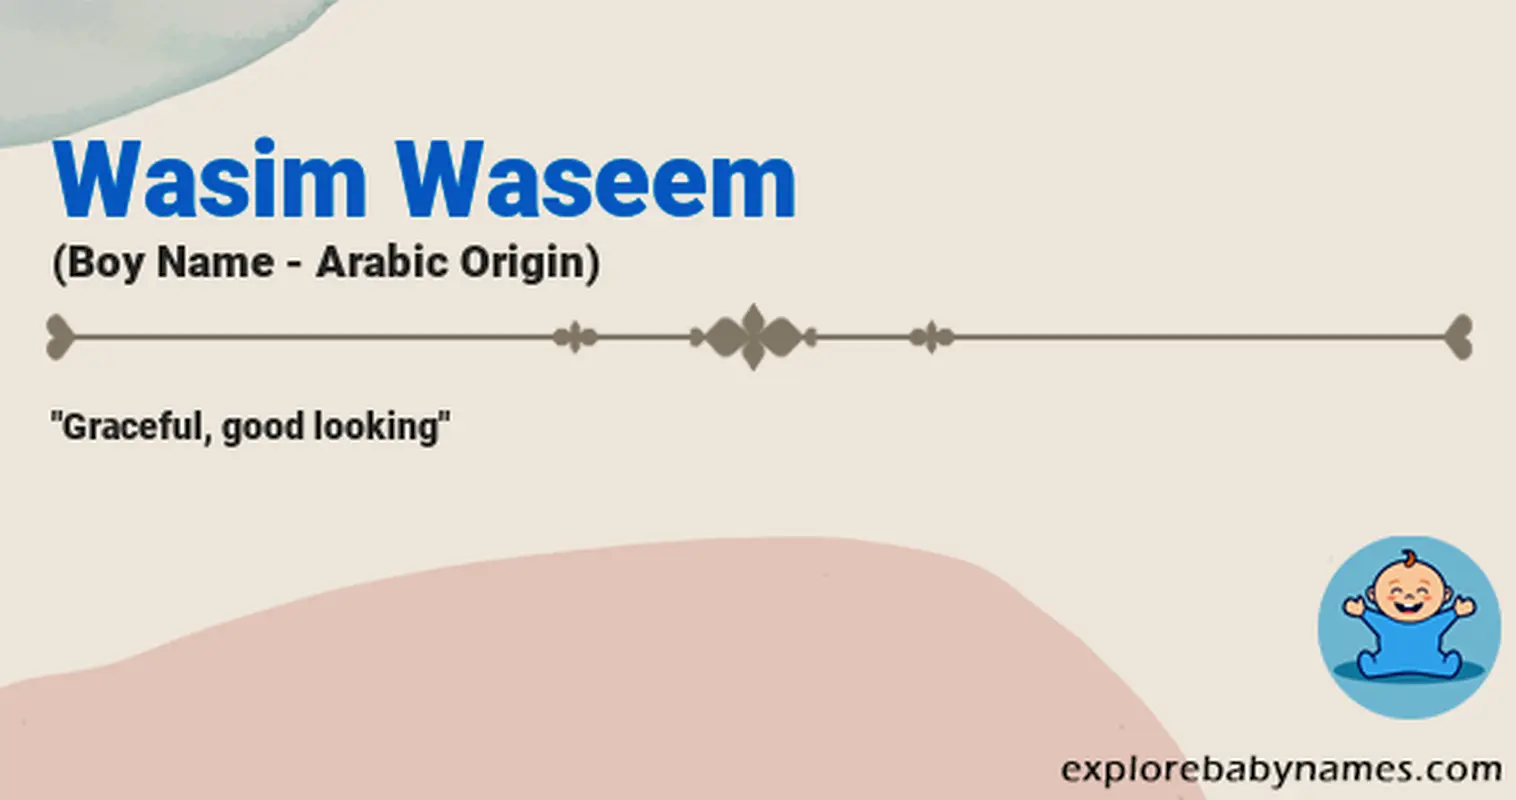 Meaning of Wasim Waseem